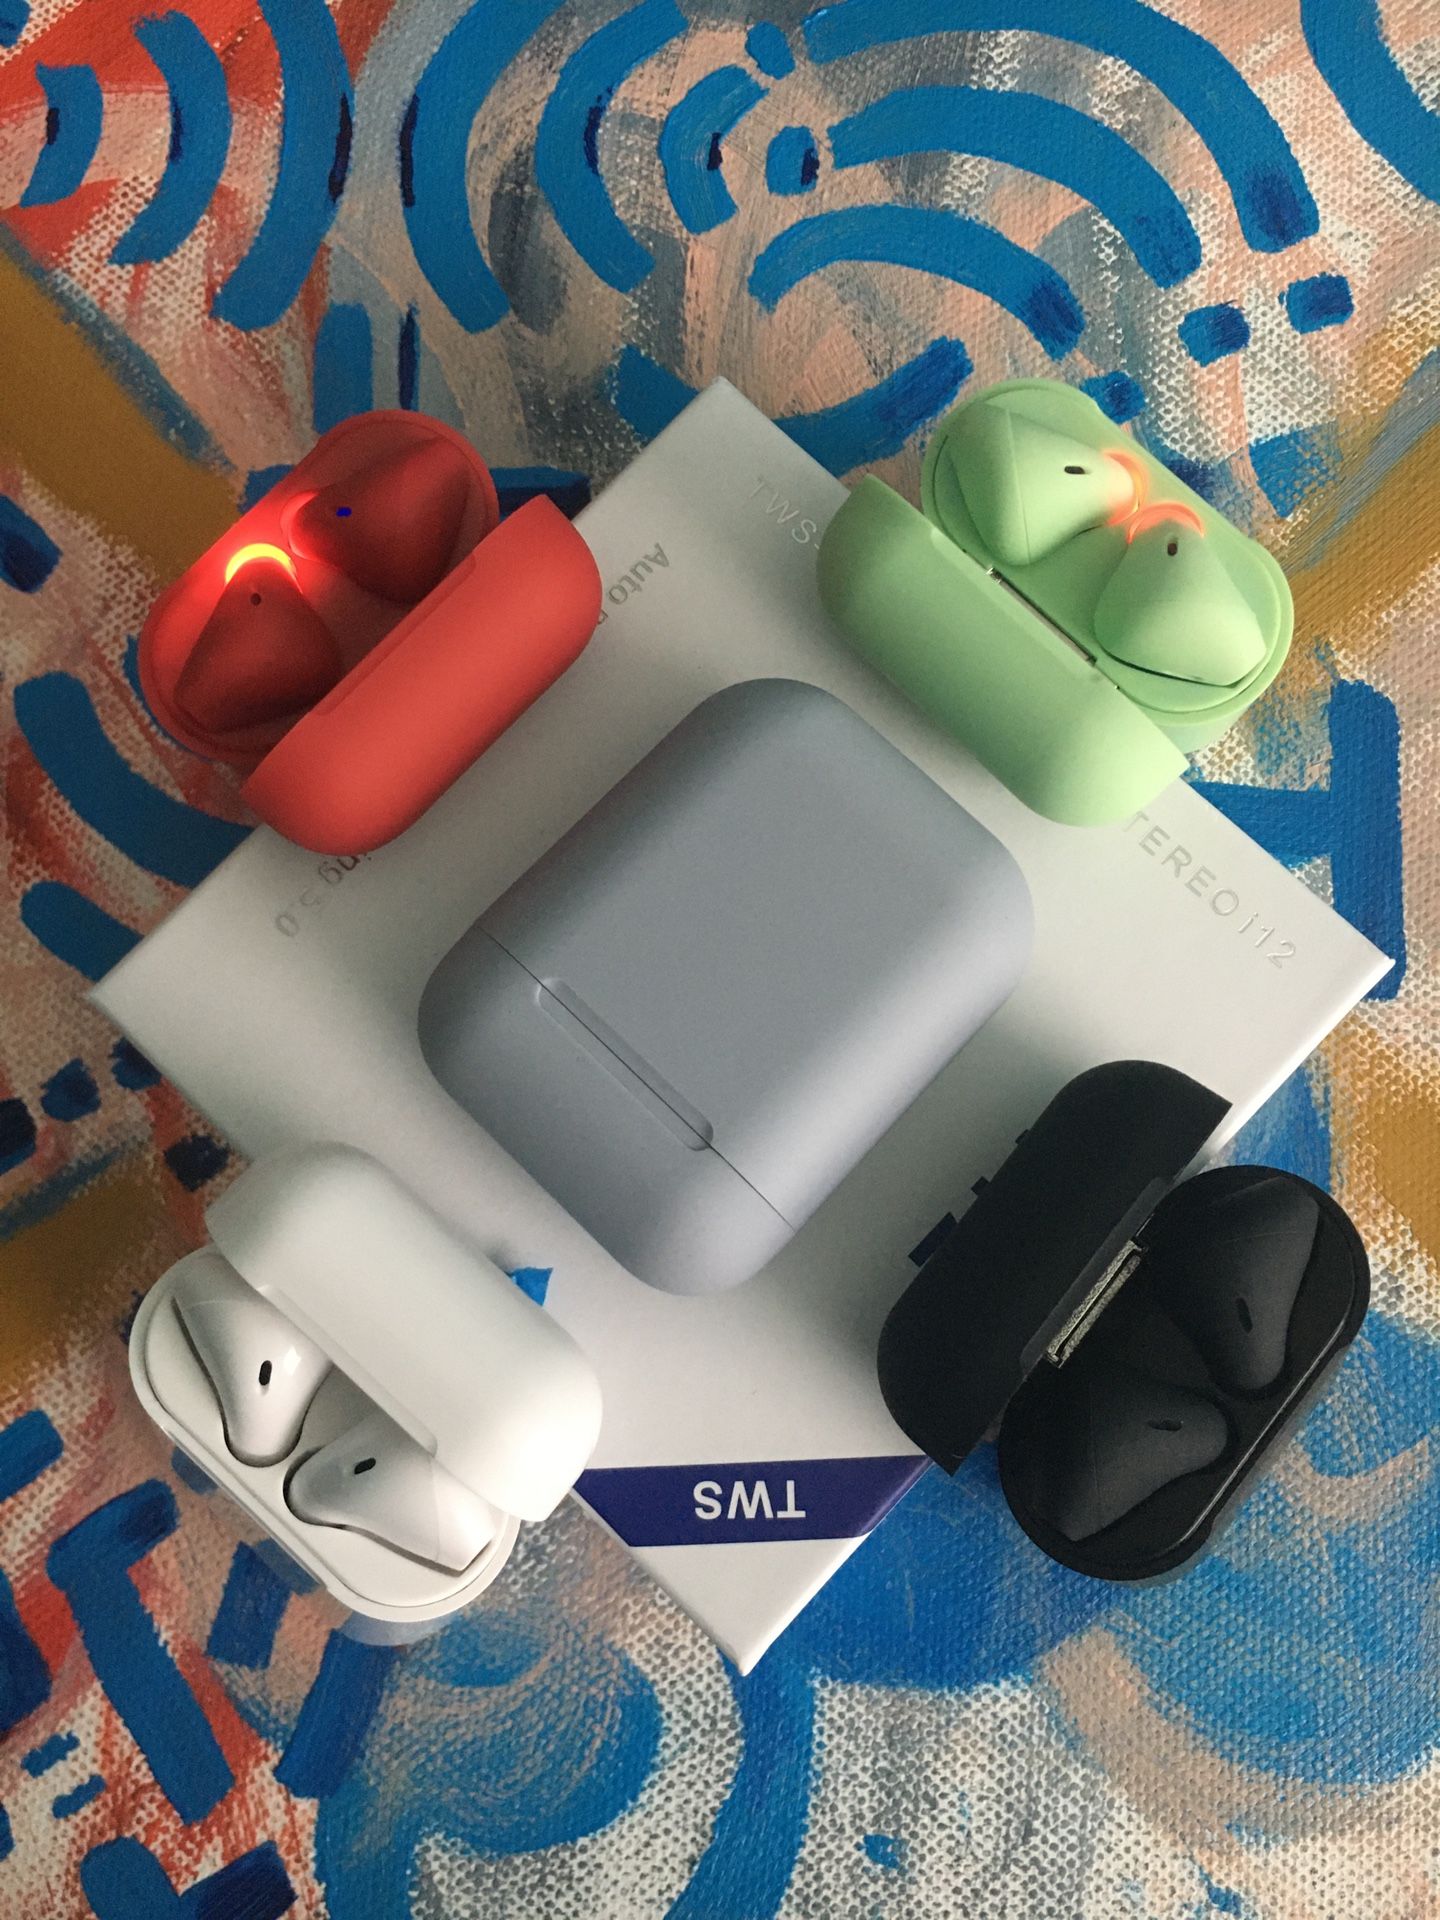 Wireless EarBuds Bluetooth Ear Pods Headphones for Iphone Android Samsung (Airpods)